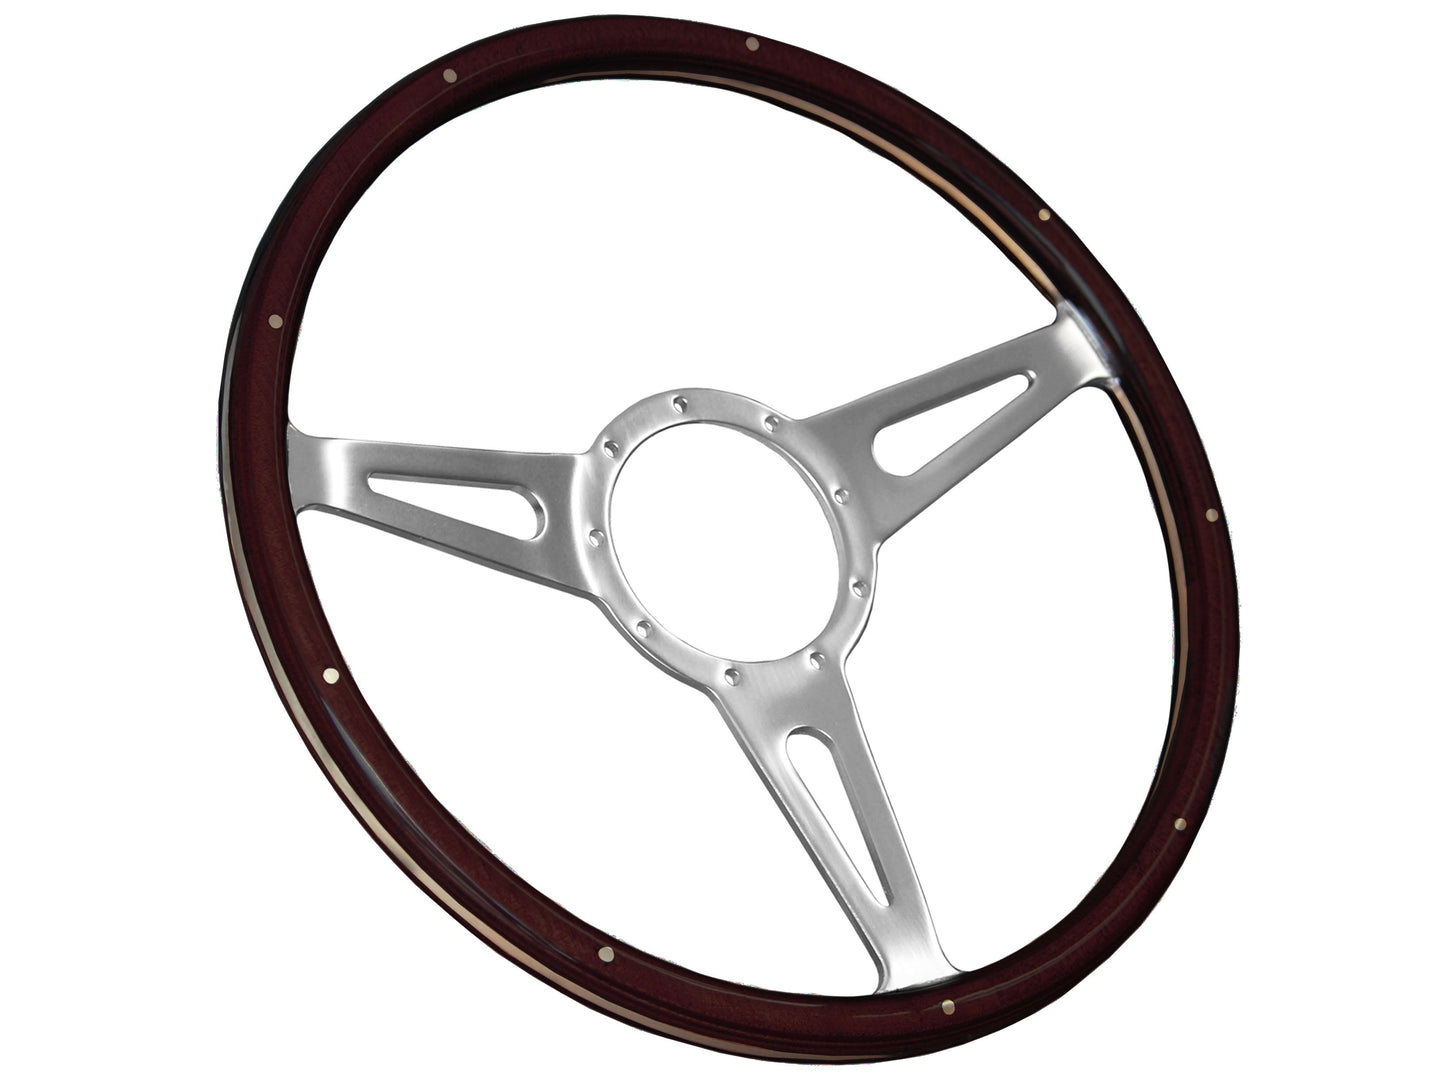 1965-69 Ford Falcon Steering Wheel Kit | Deluxe Espresso Wood | ST3053A